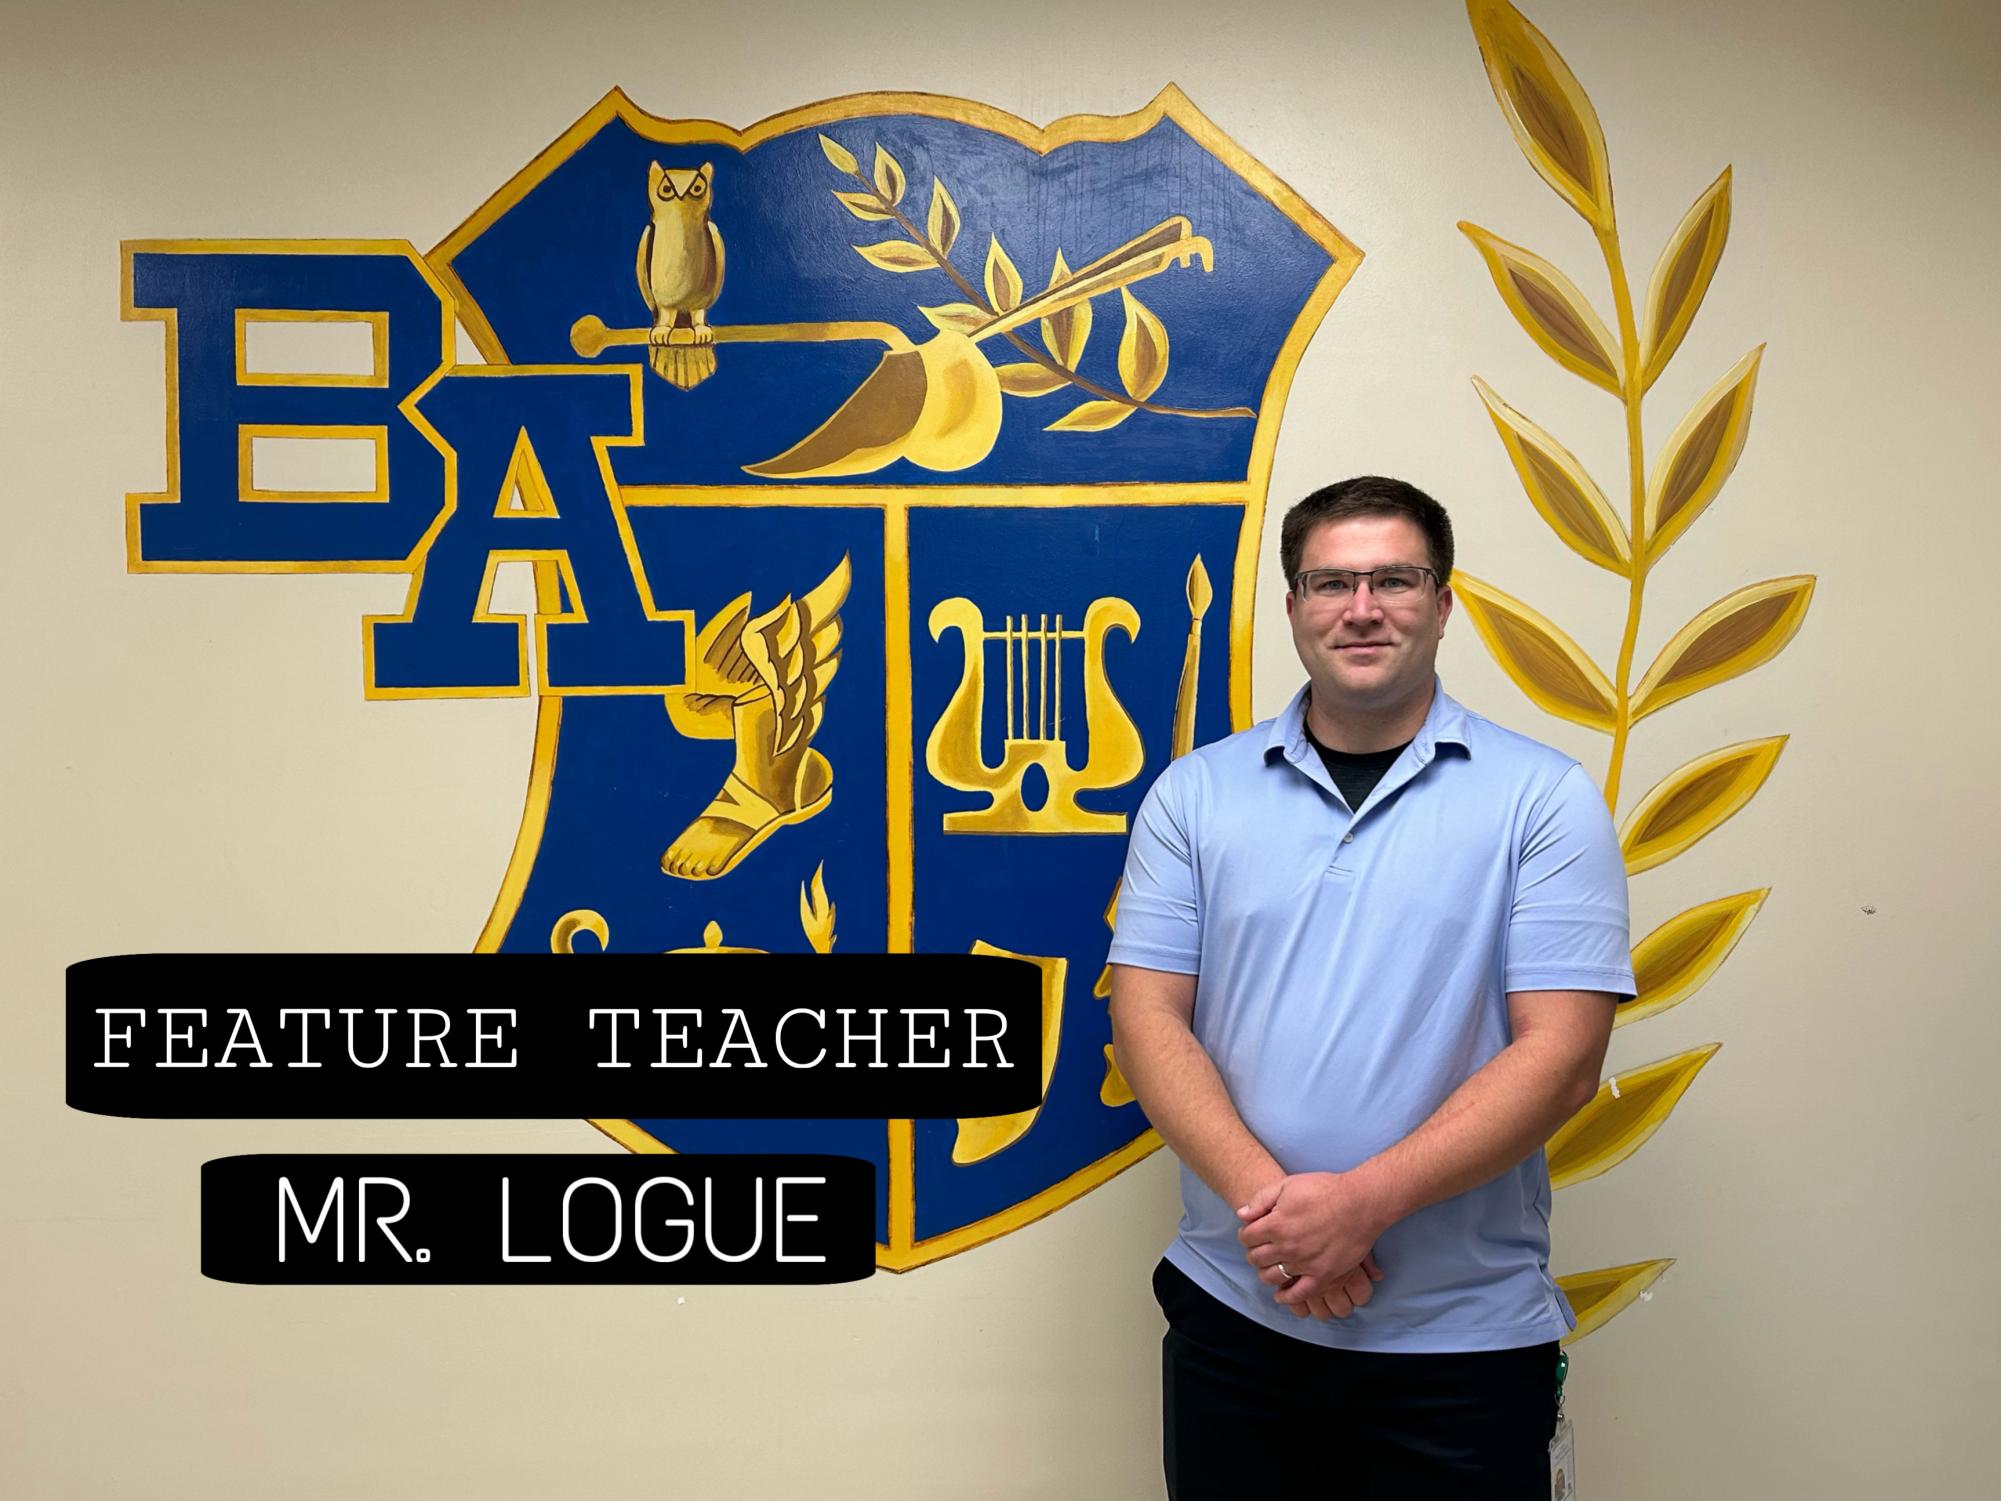 Mr. Logue is this weeks feature teacher!